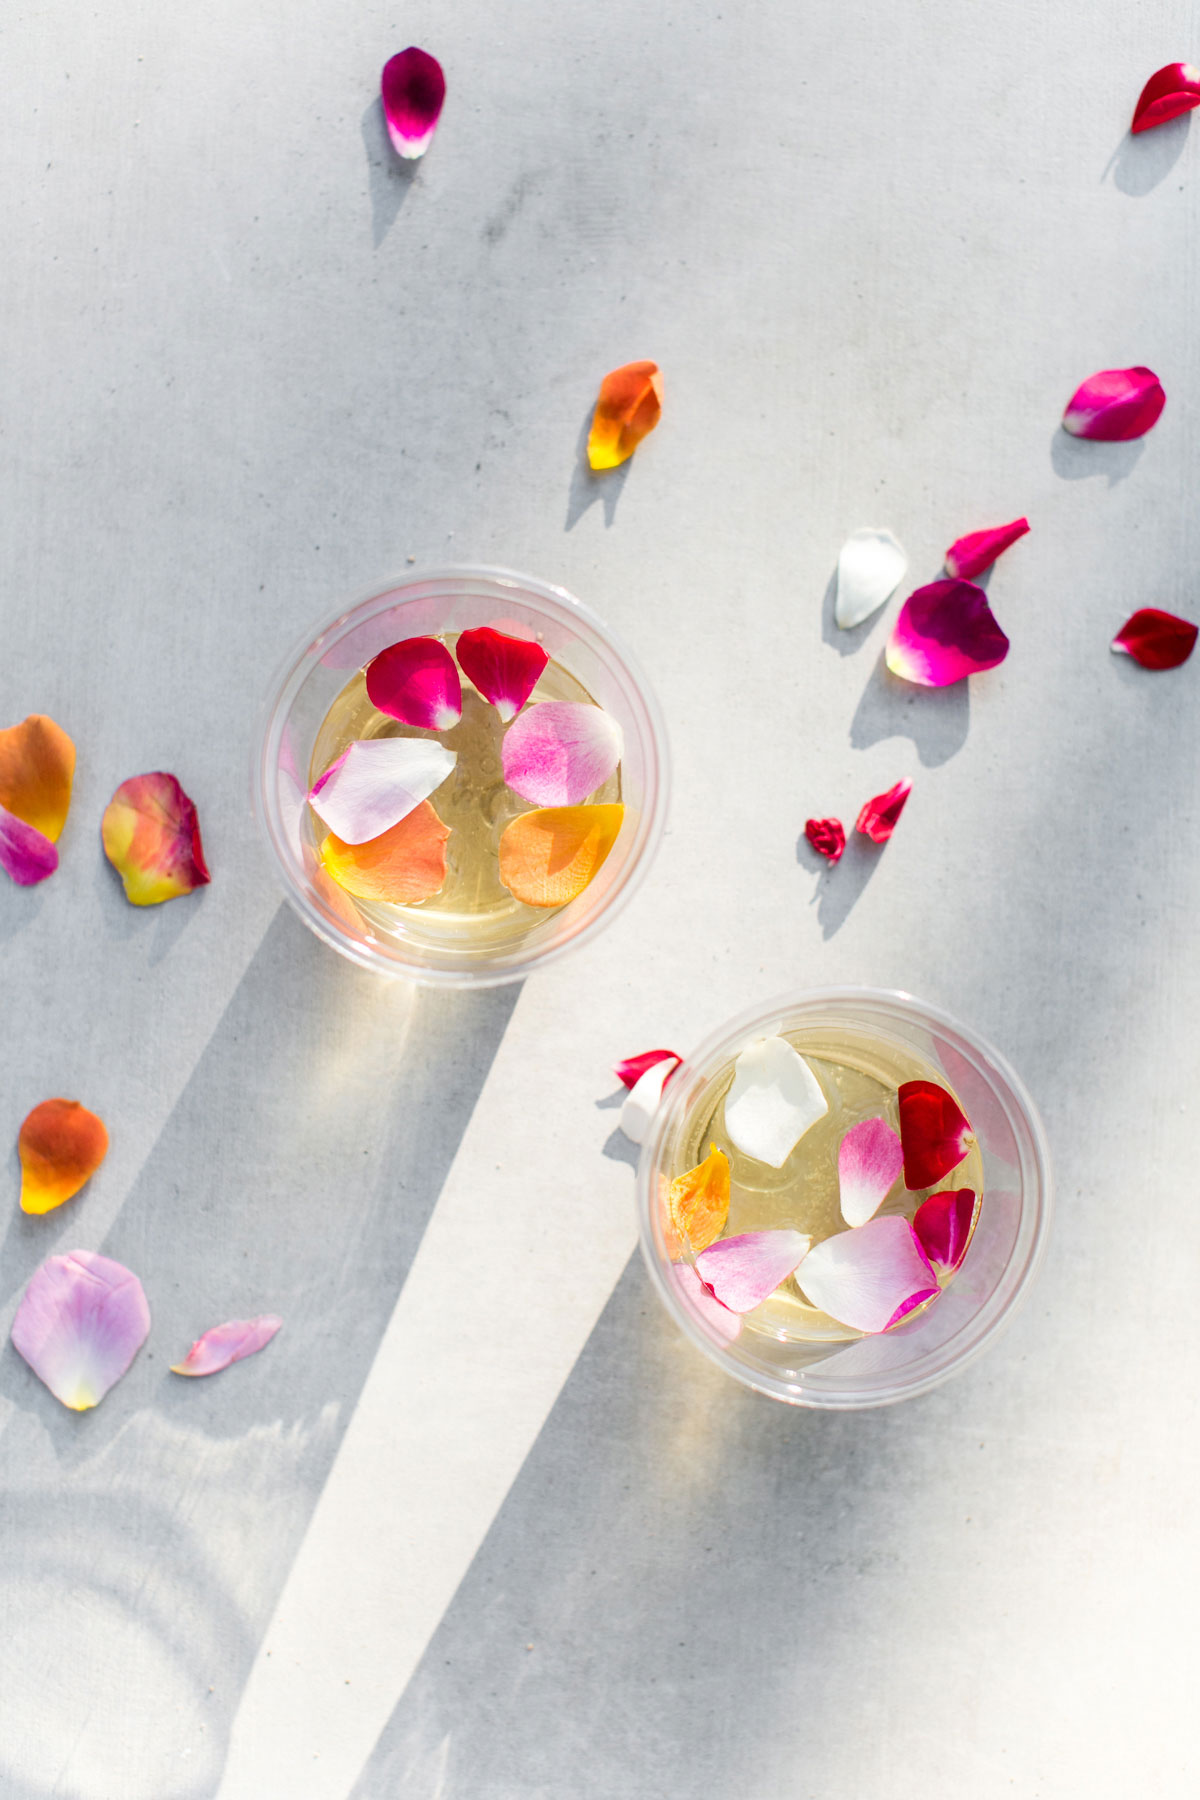 Enjoy some edible flowers in your glass of K-J AVANT Sauvignon Blanc.